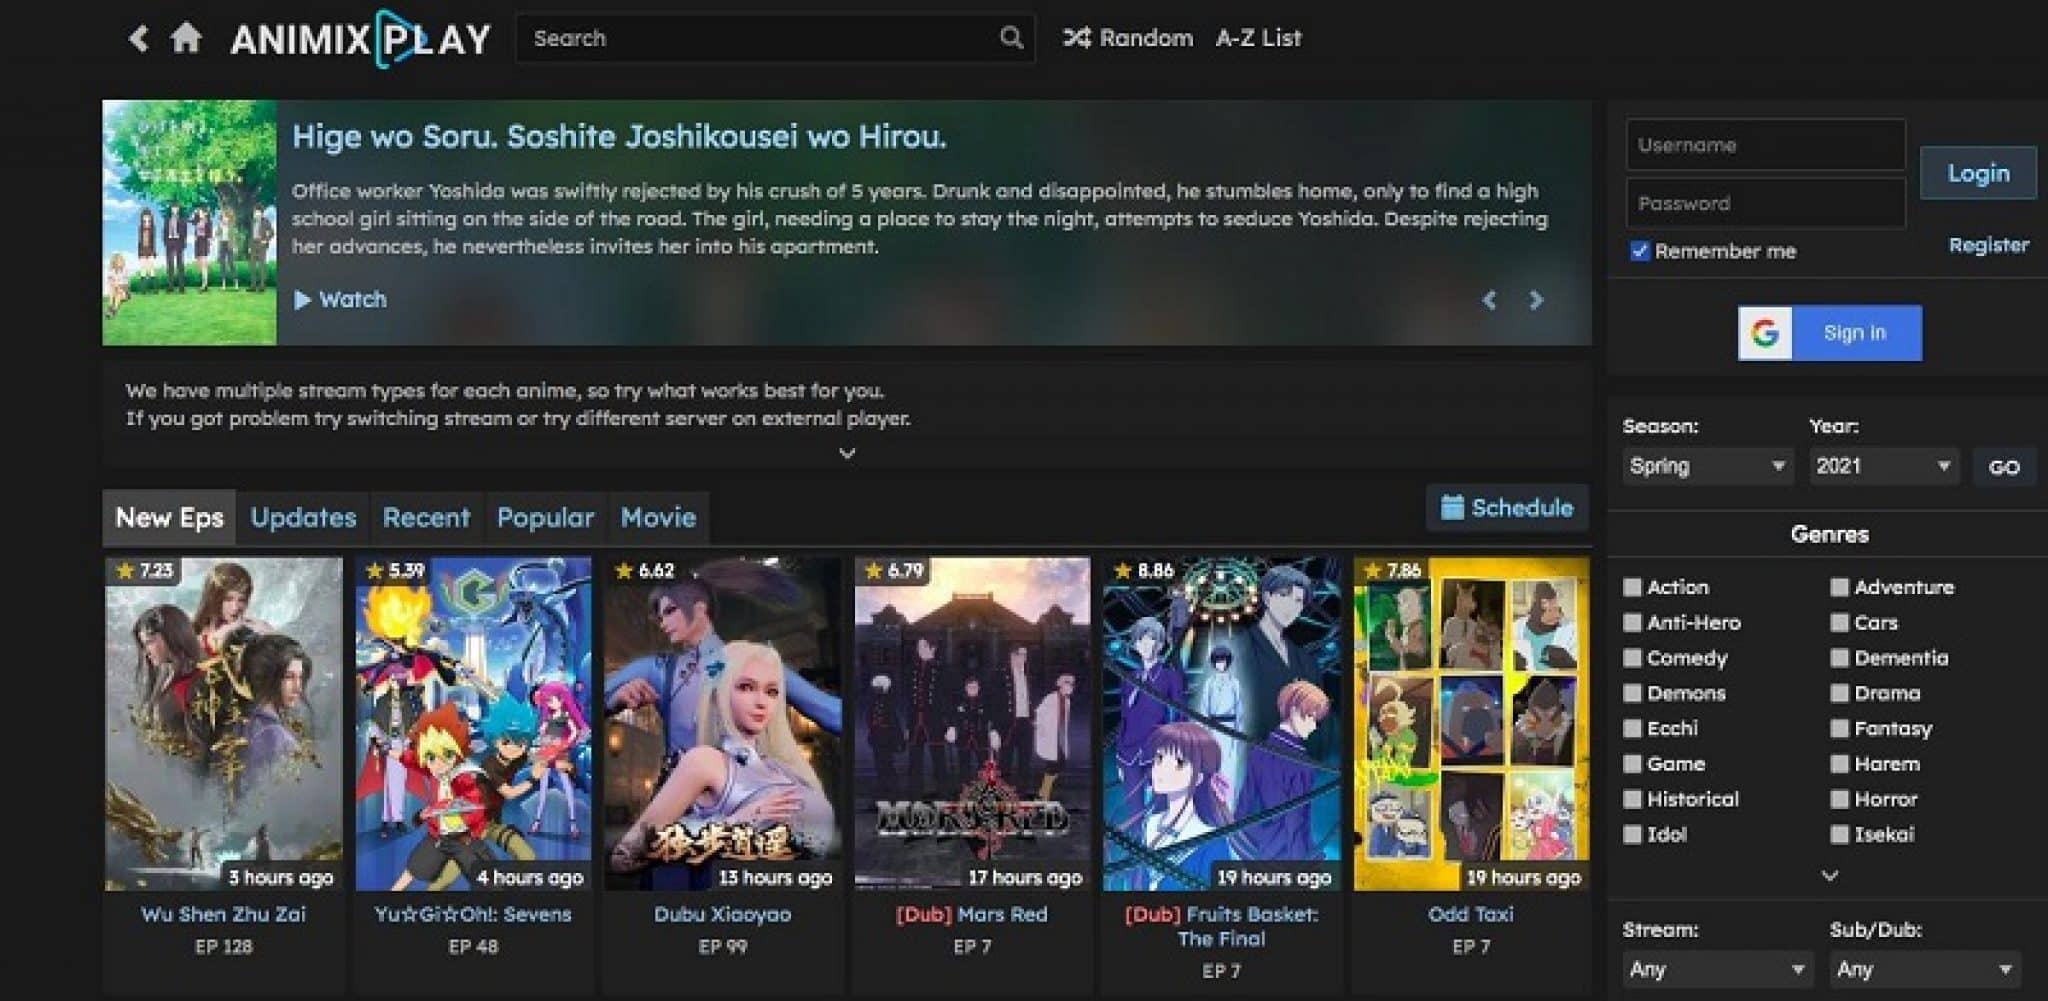 The Best 3 Free Anime Sites of All Time - TechUseful